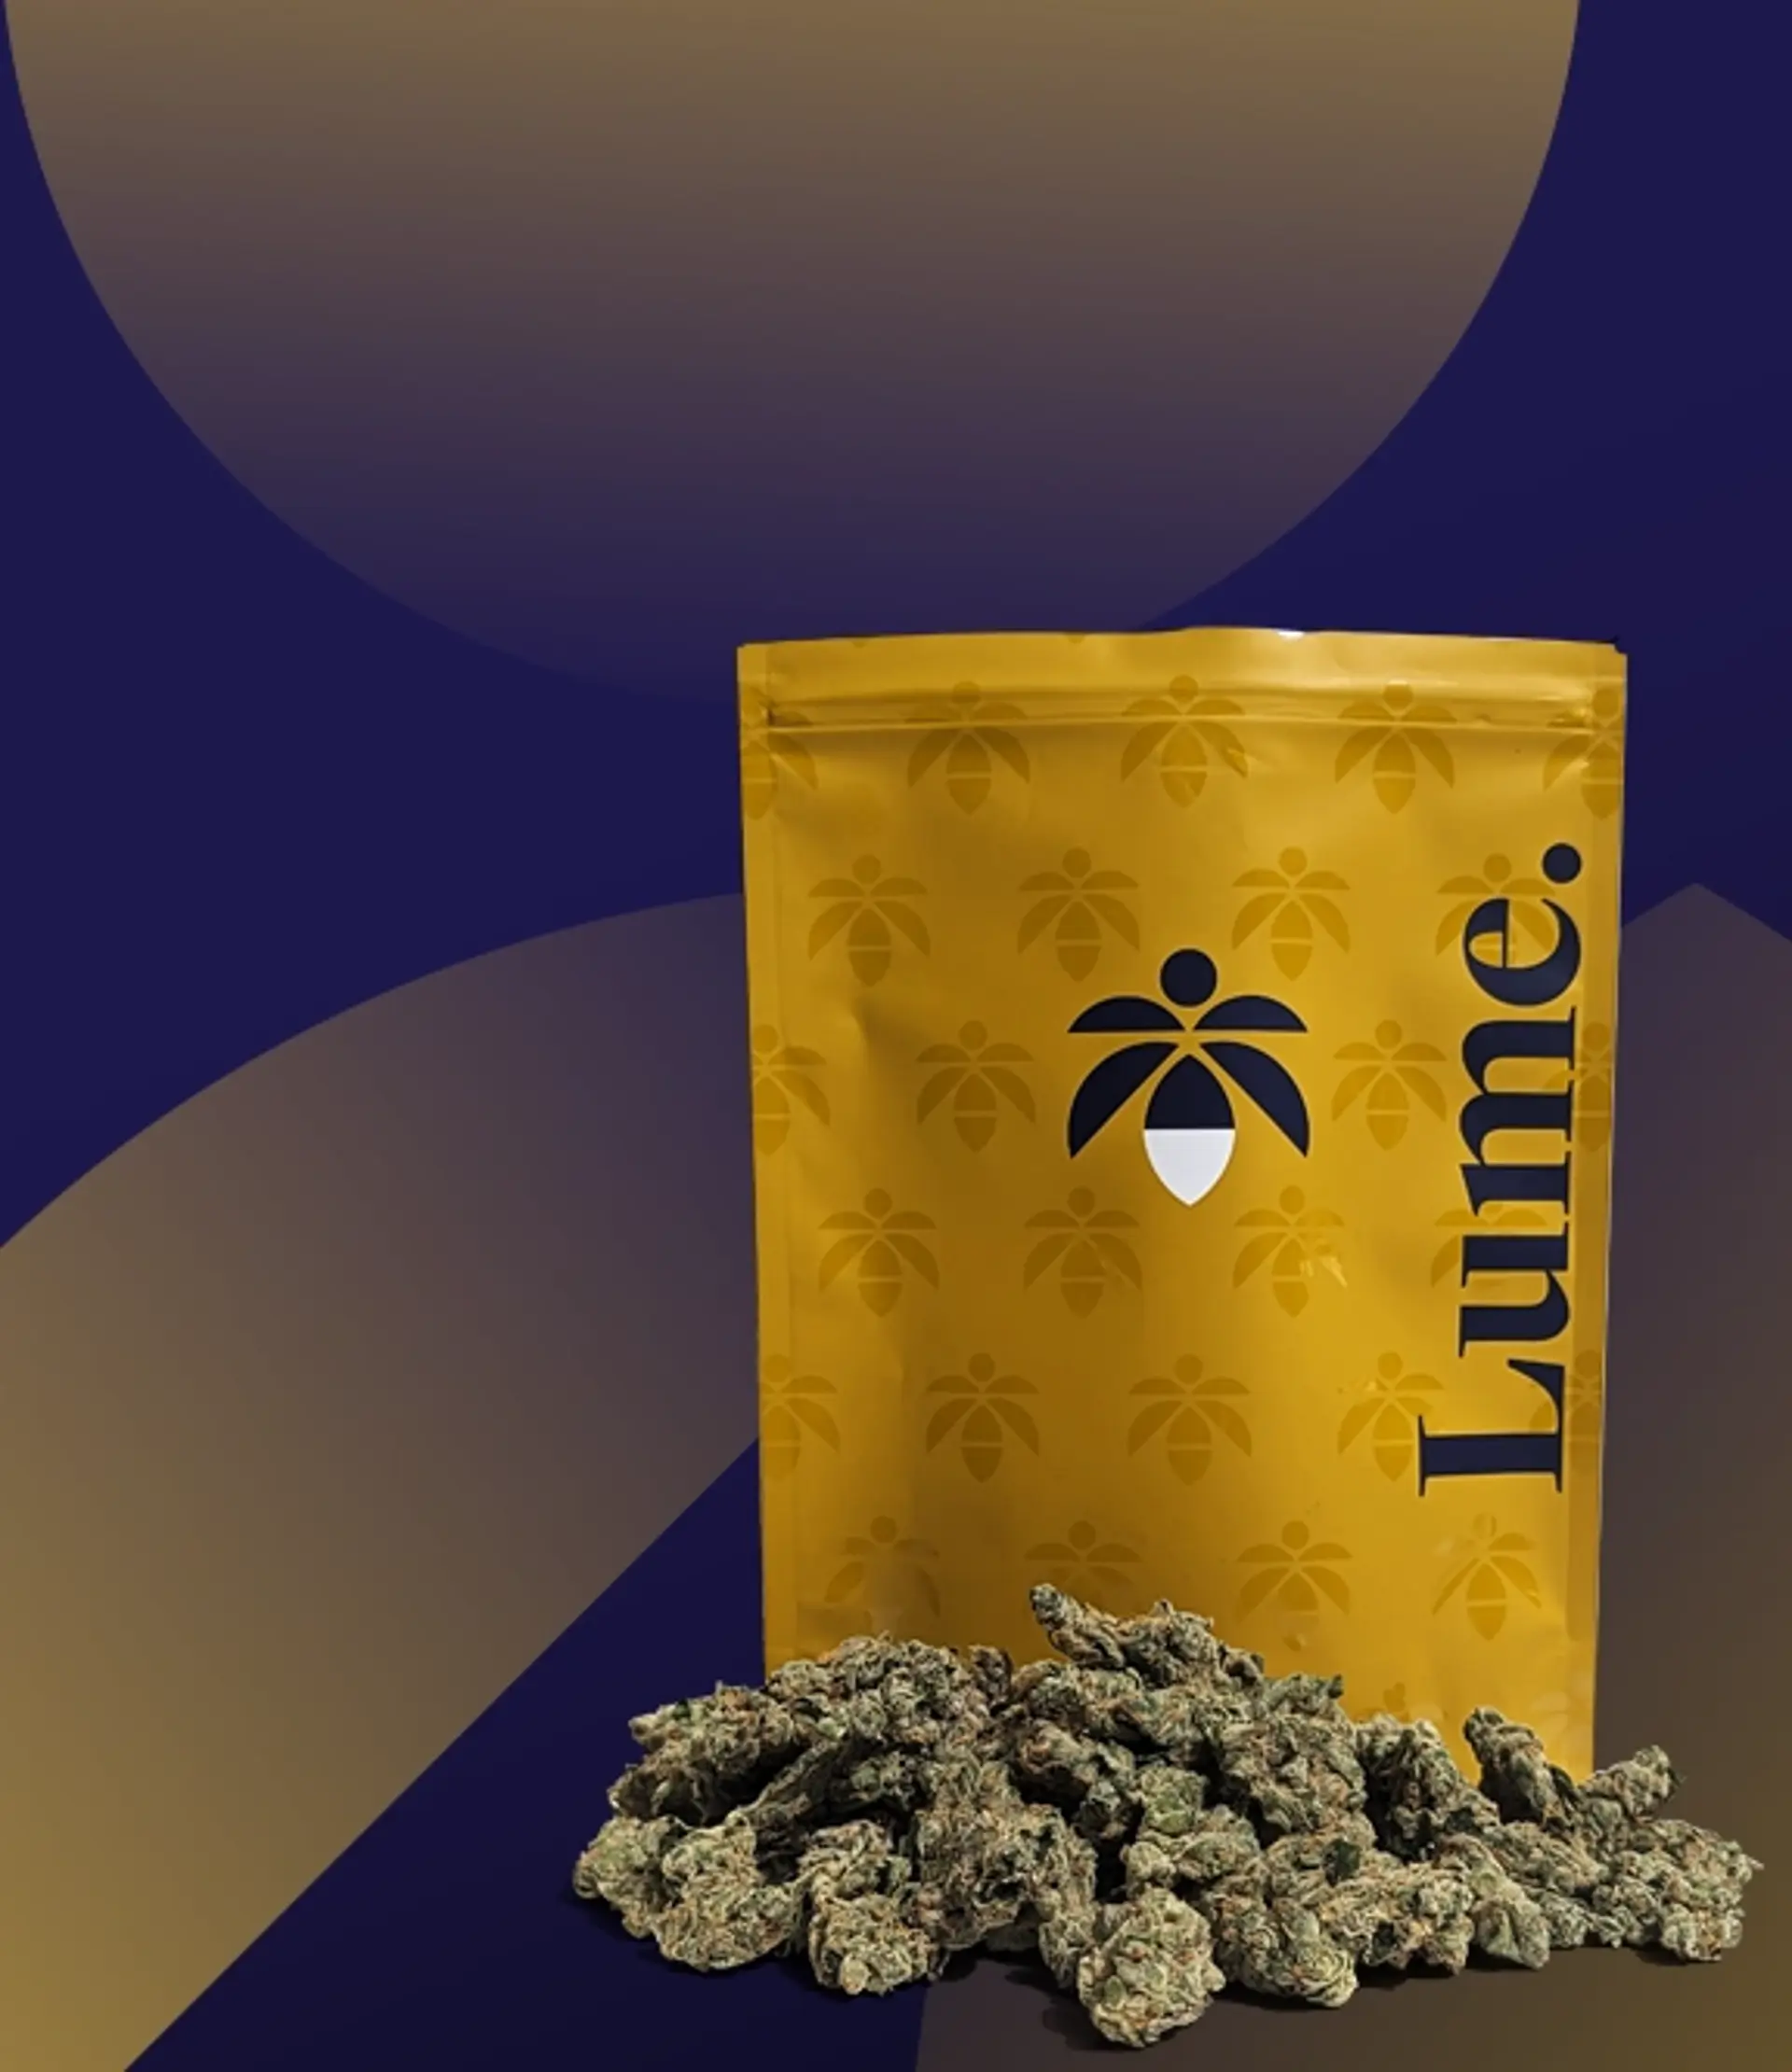 Blue Skunk Shatter 1g  Lume Cannabis Co. - Michigan's Largest Cannabis  Company